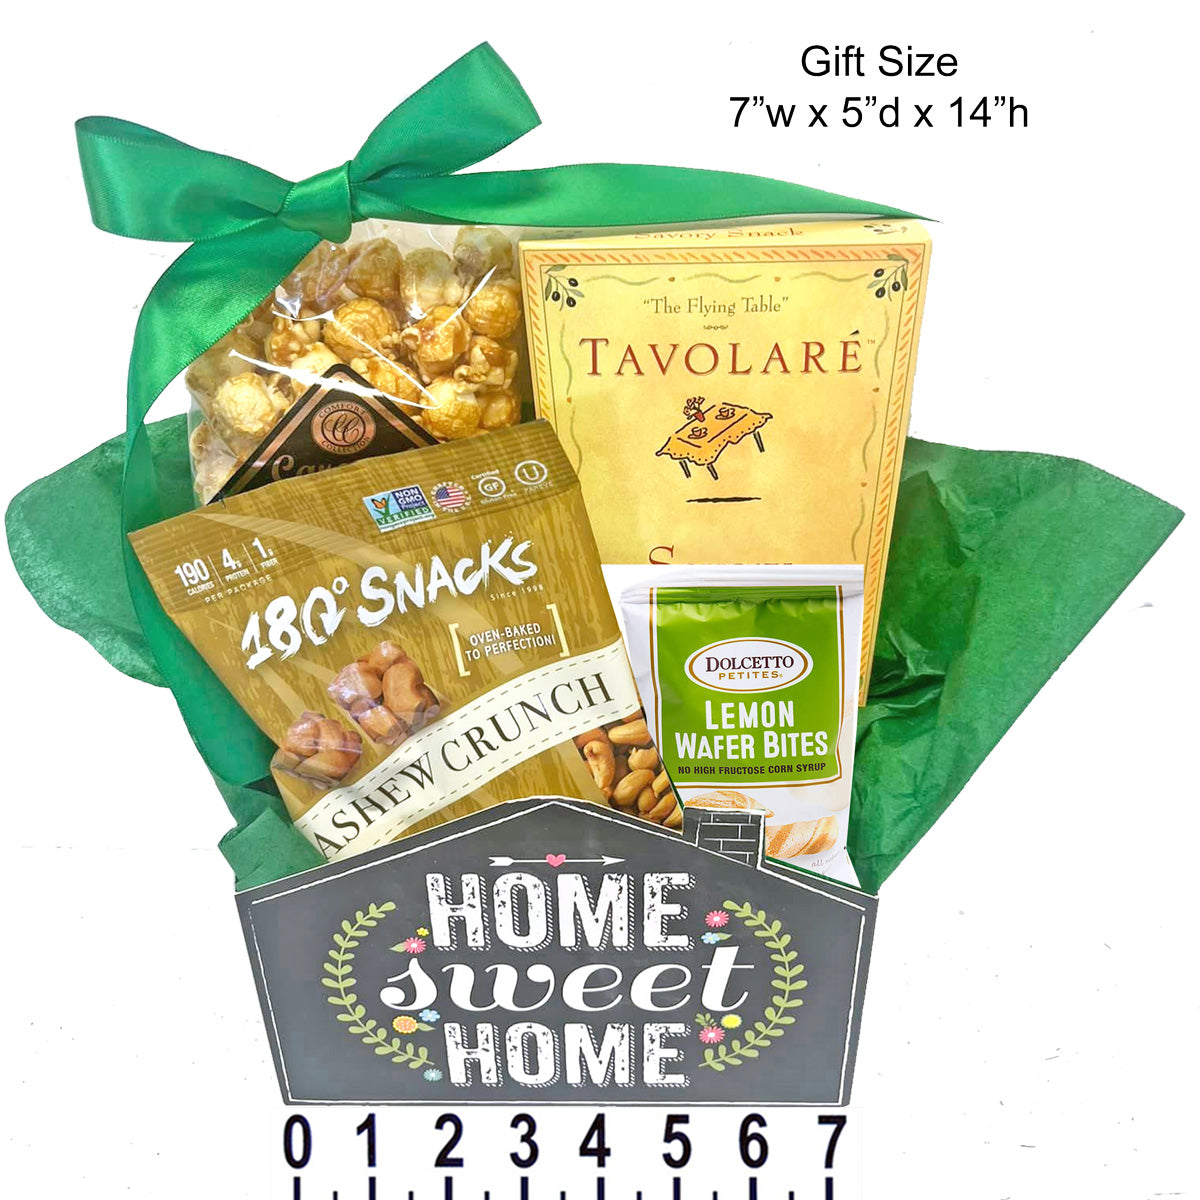 Home Sweet Home Gift For New Homeowners, Realtors, Renters – Gifts Fulfilled